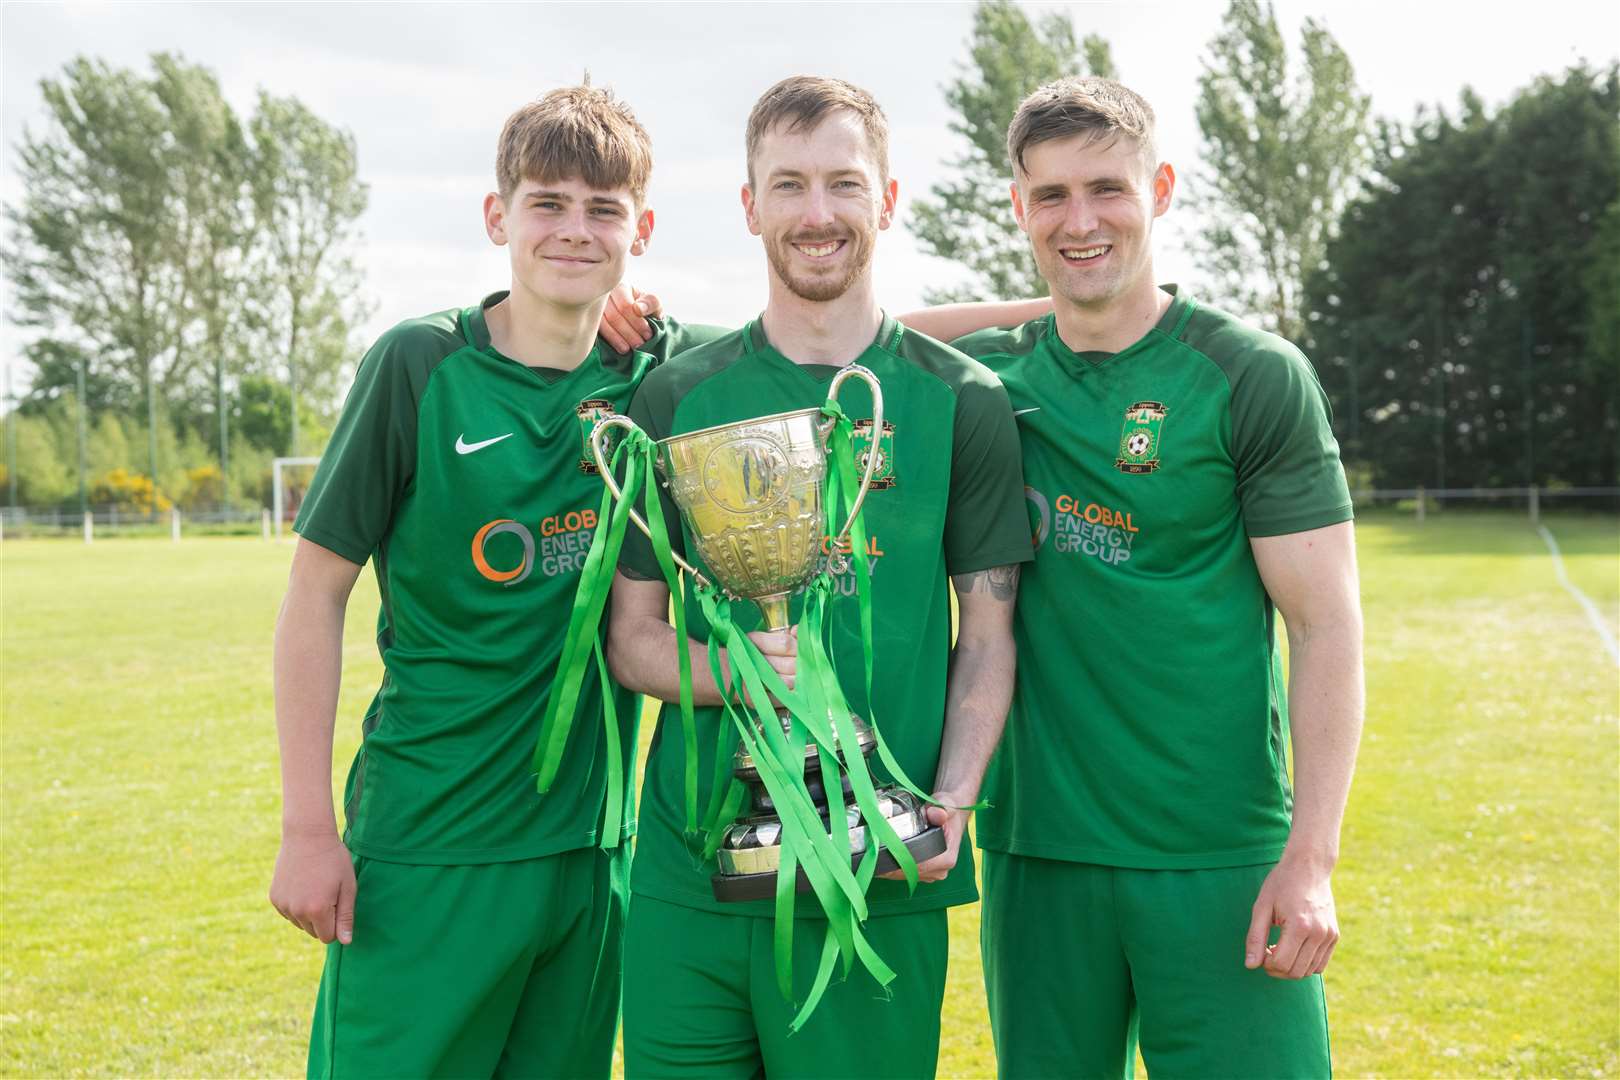 Aiden Cruickshank, Ben Cullen and Finlay Stables with the cup...Dufftown FC (2) vs Forres Thistle FC (2) - Dufftown FC win 5-3 on penalties - Elginshire Cup Final held at Logie Park, Forres 14/05/2022...Picture: Daniel Forsyth..